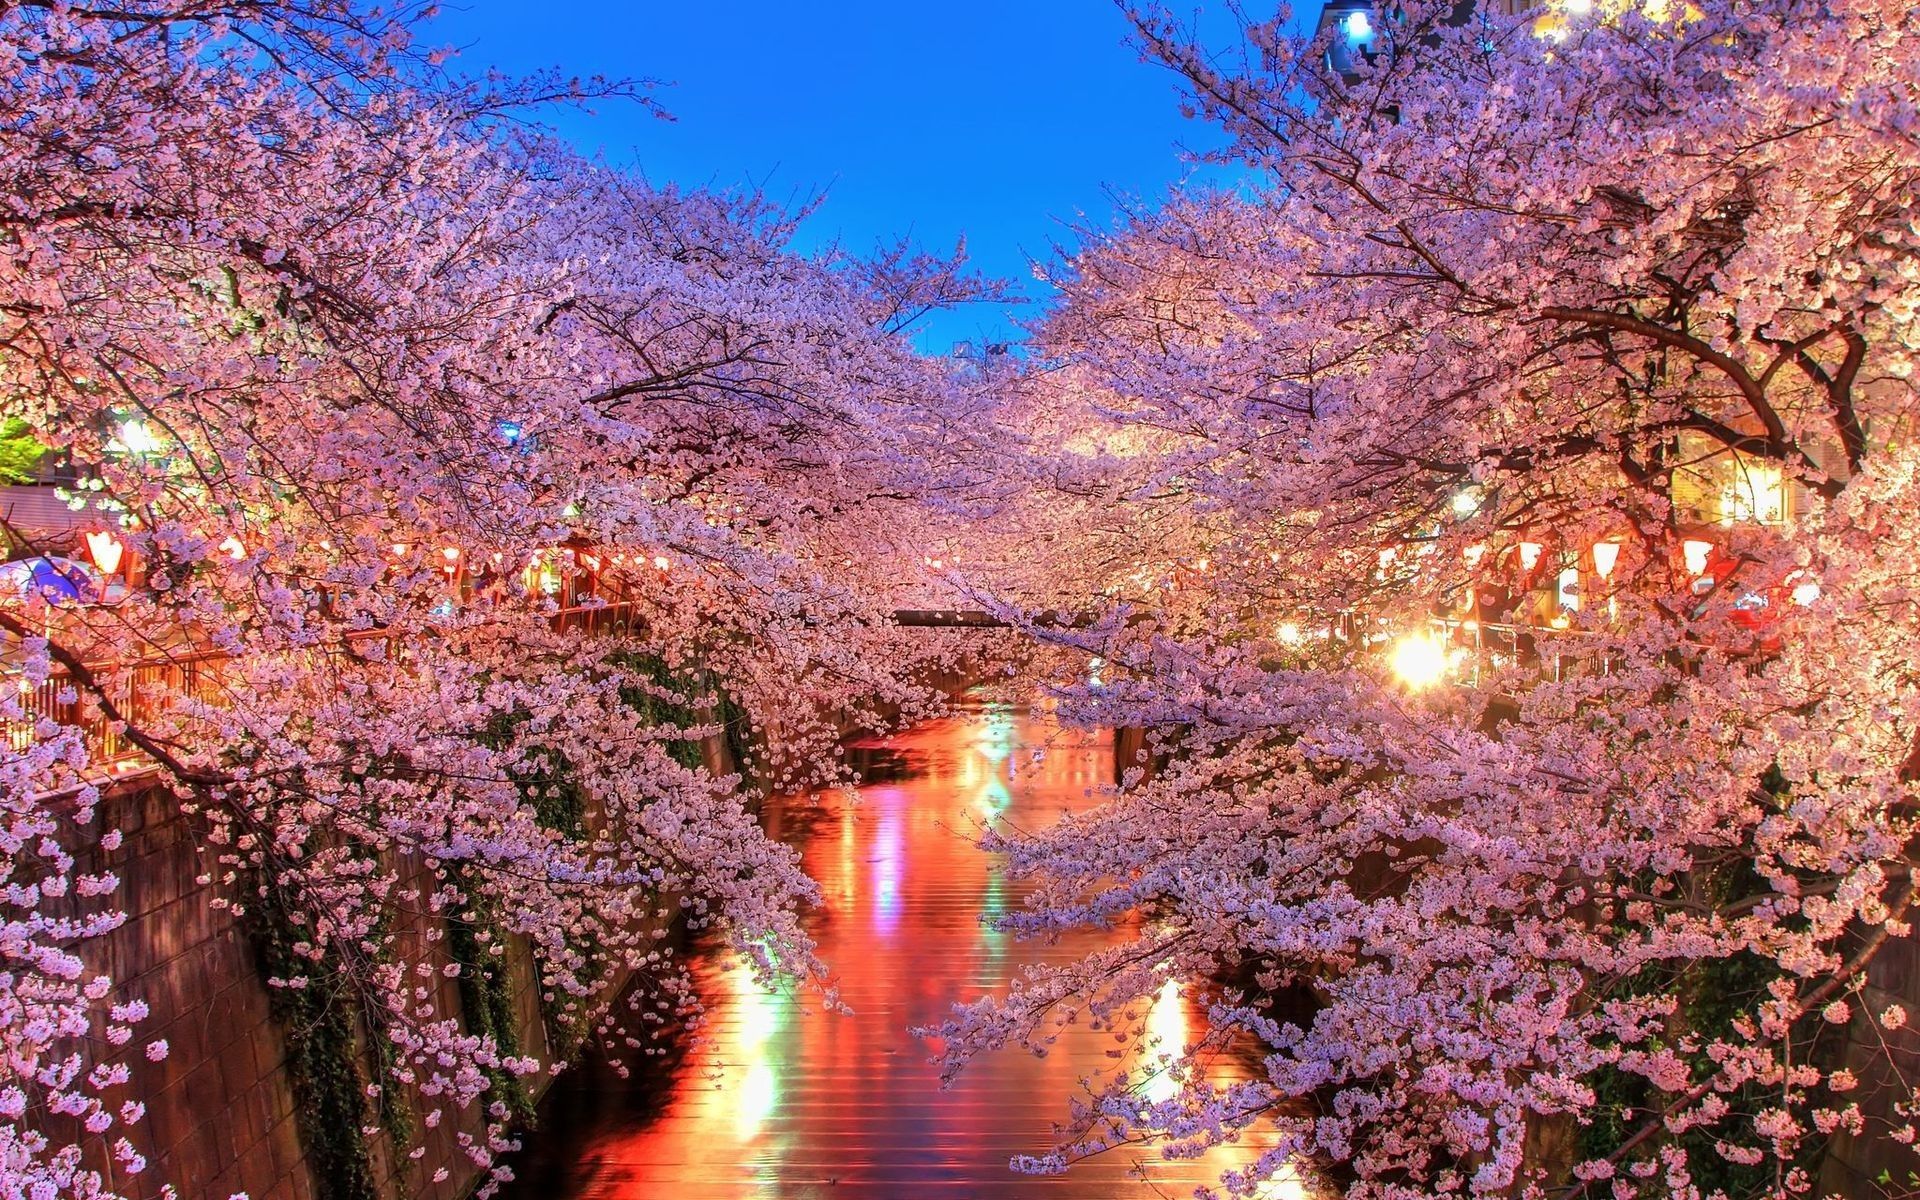 #water, #river, #plants, #flowers, #trees, #photography, #cherry blossom, #landscape, #lights, wallpaper. Mocah.org HD Wallpaper